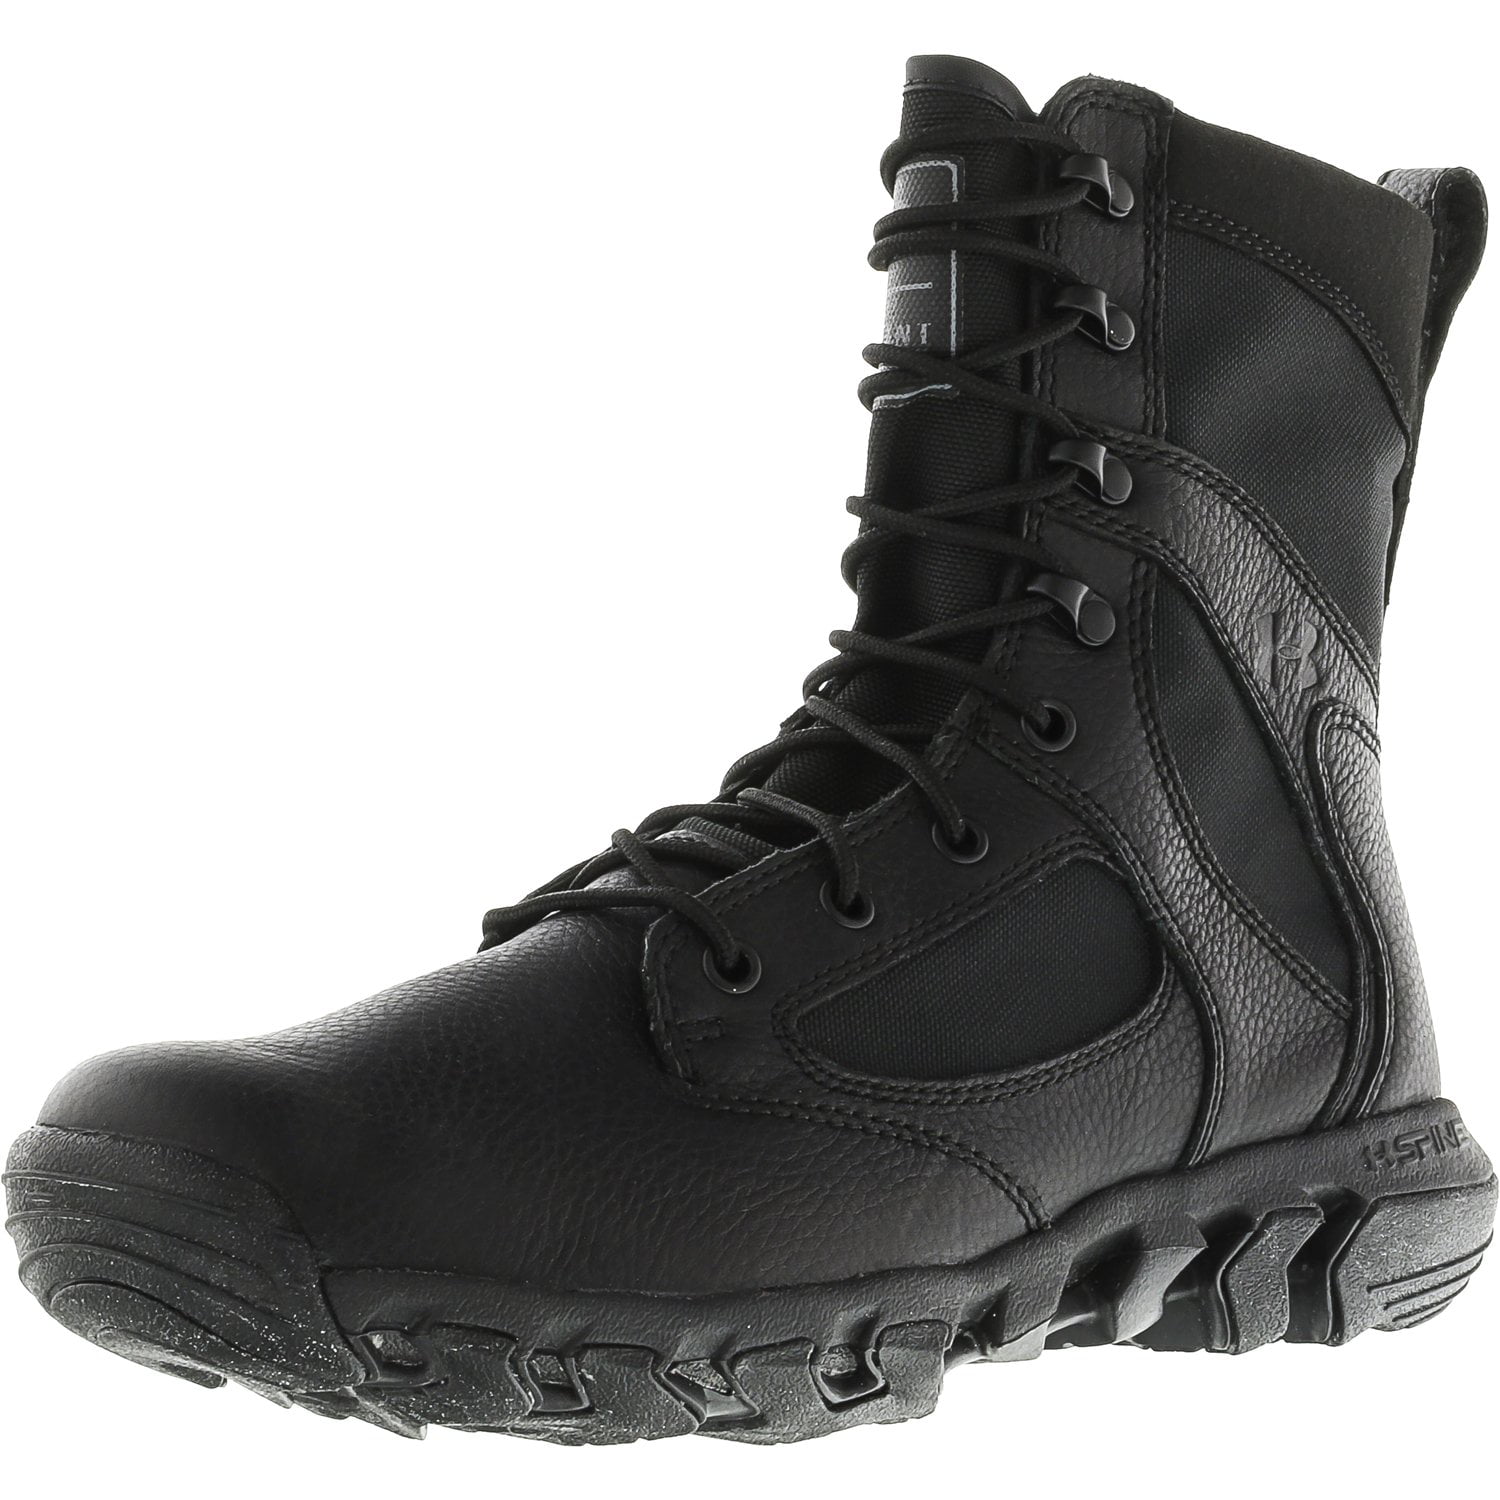 Under Armour Men's Alegent Black / High-Top Military and Tactical Boot ...